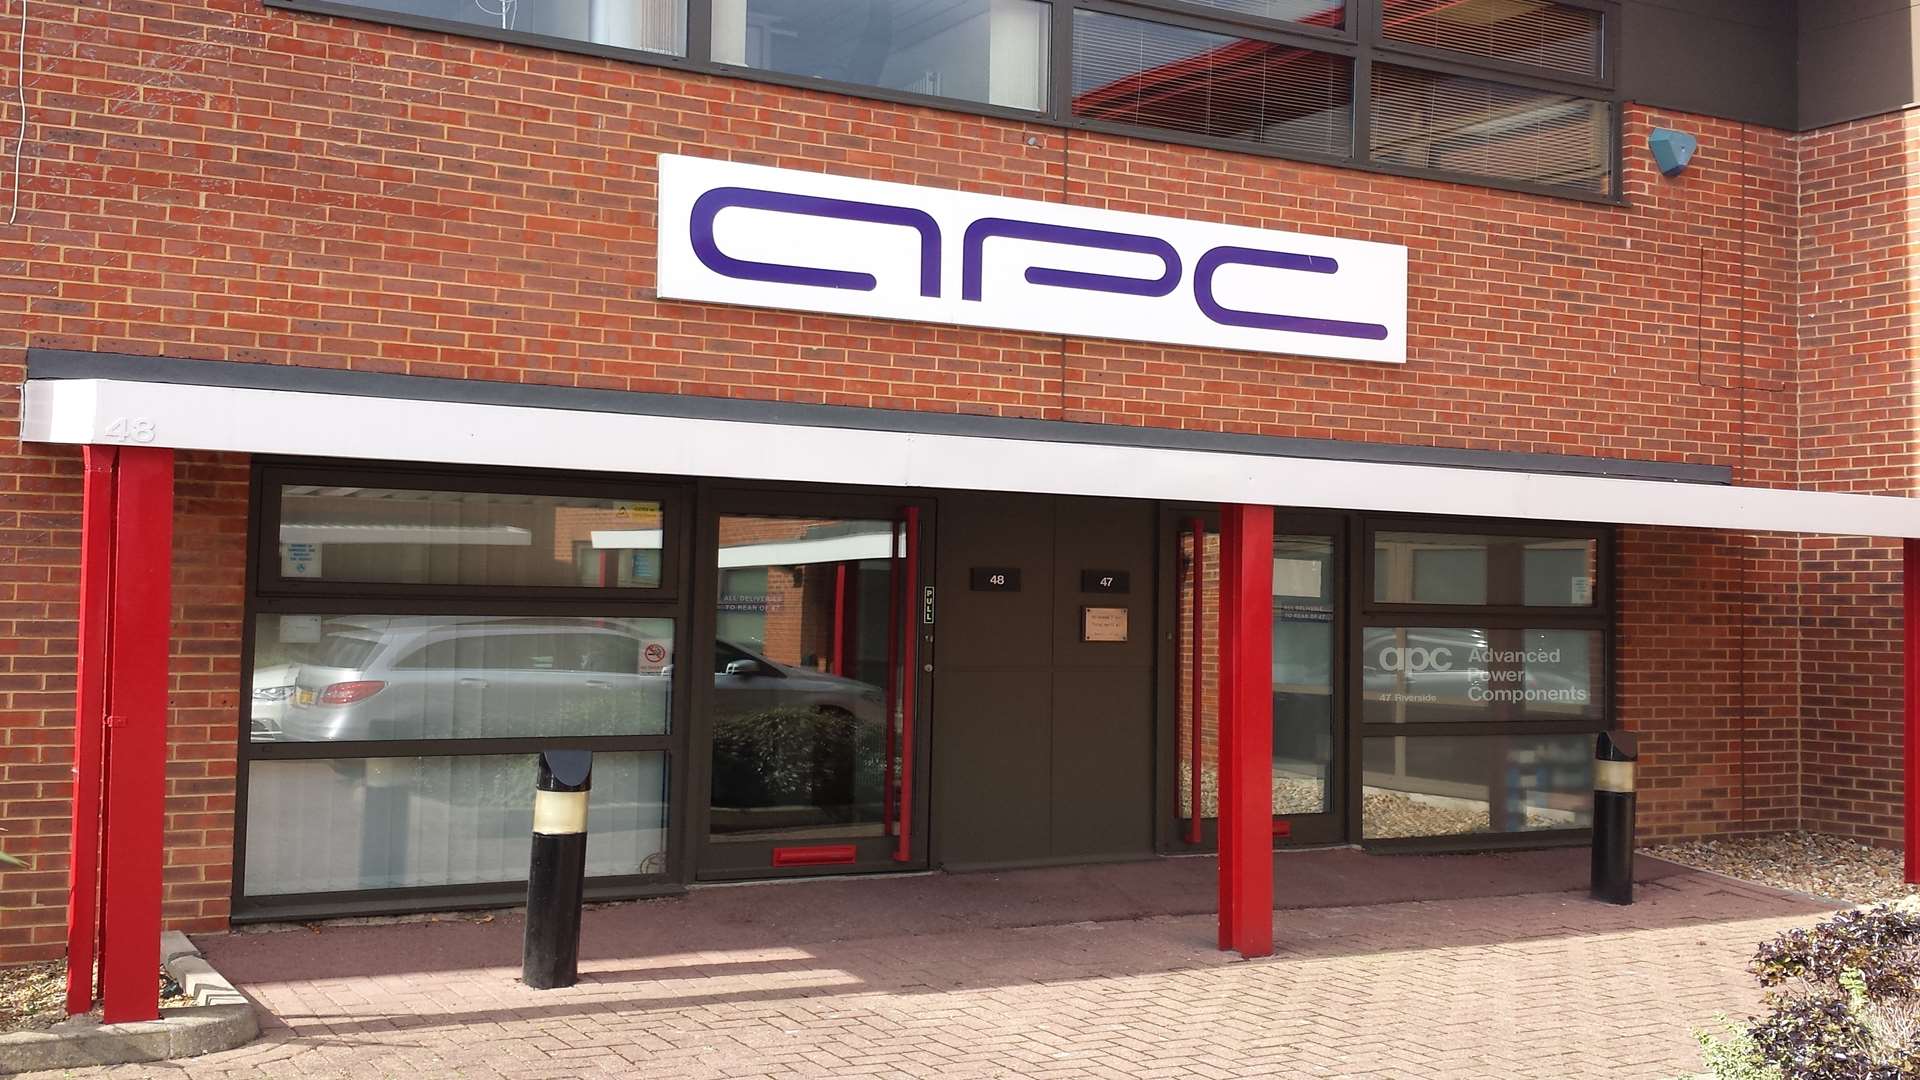 The Strood headquarters of APC Technology